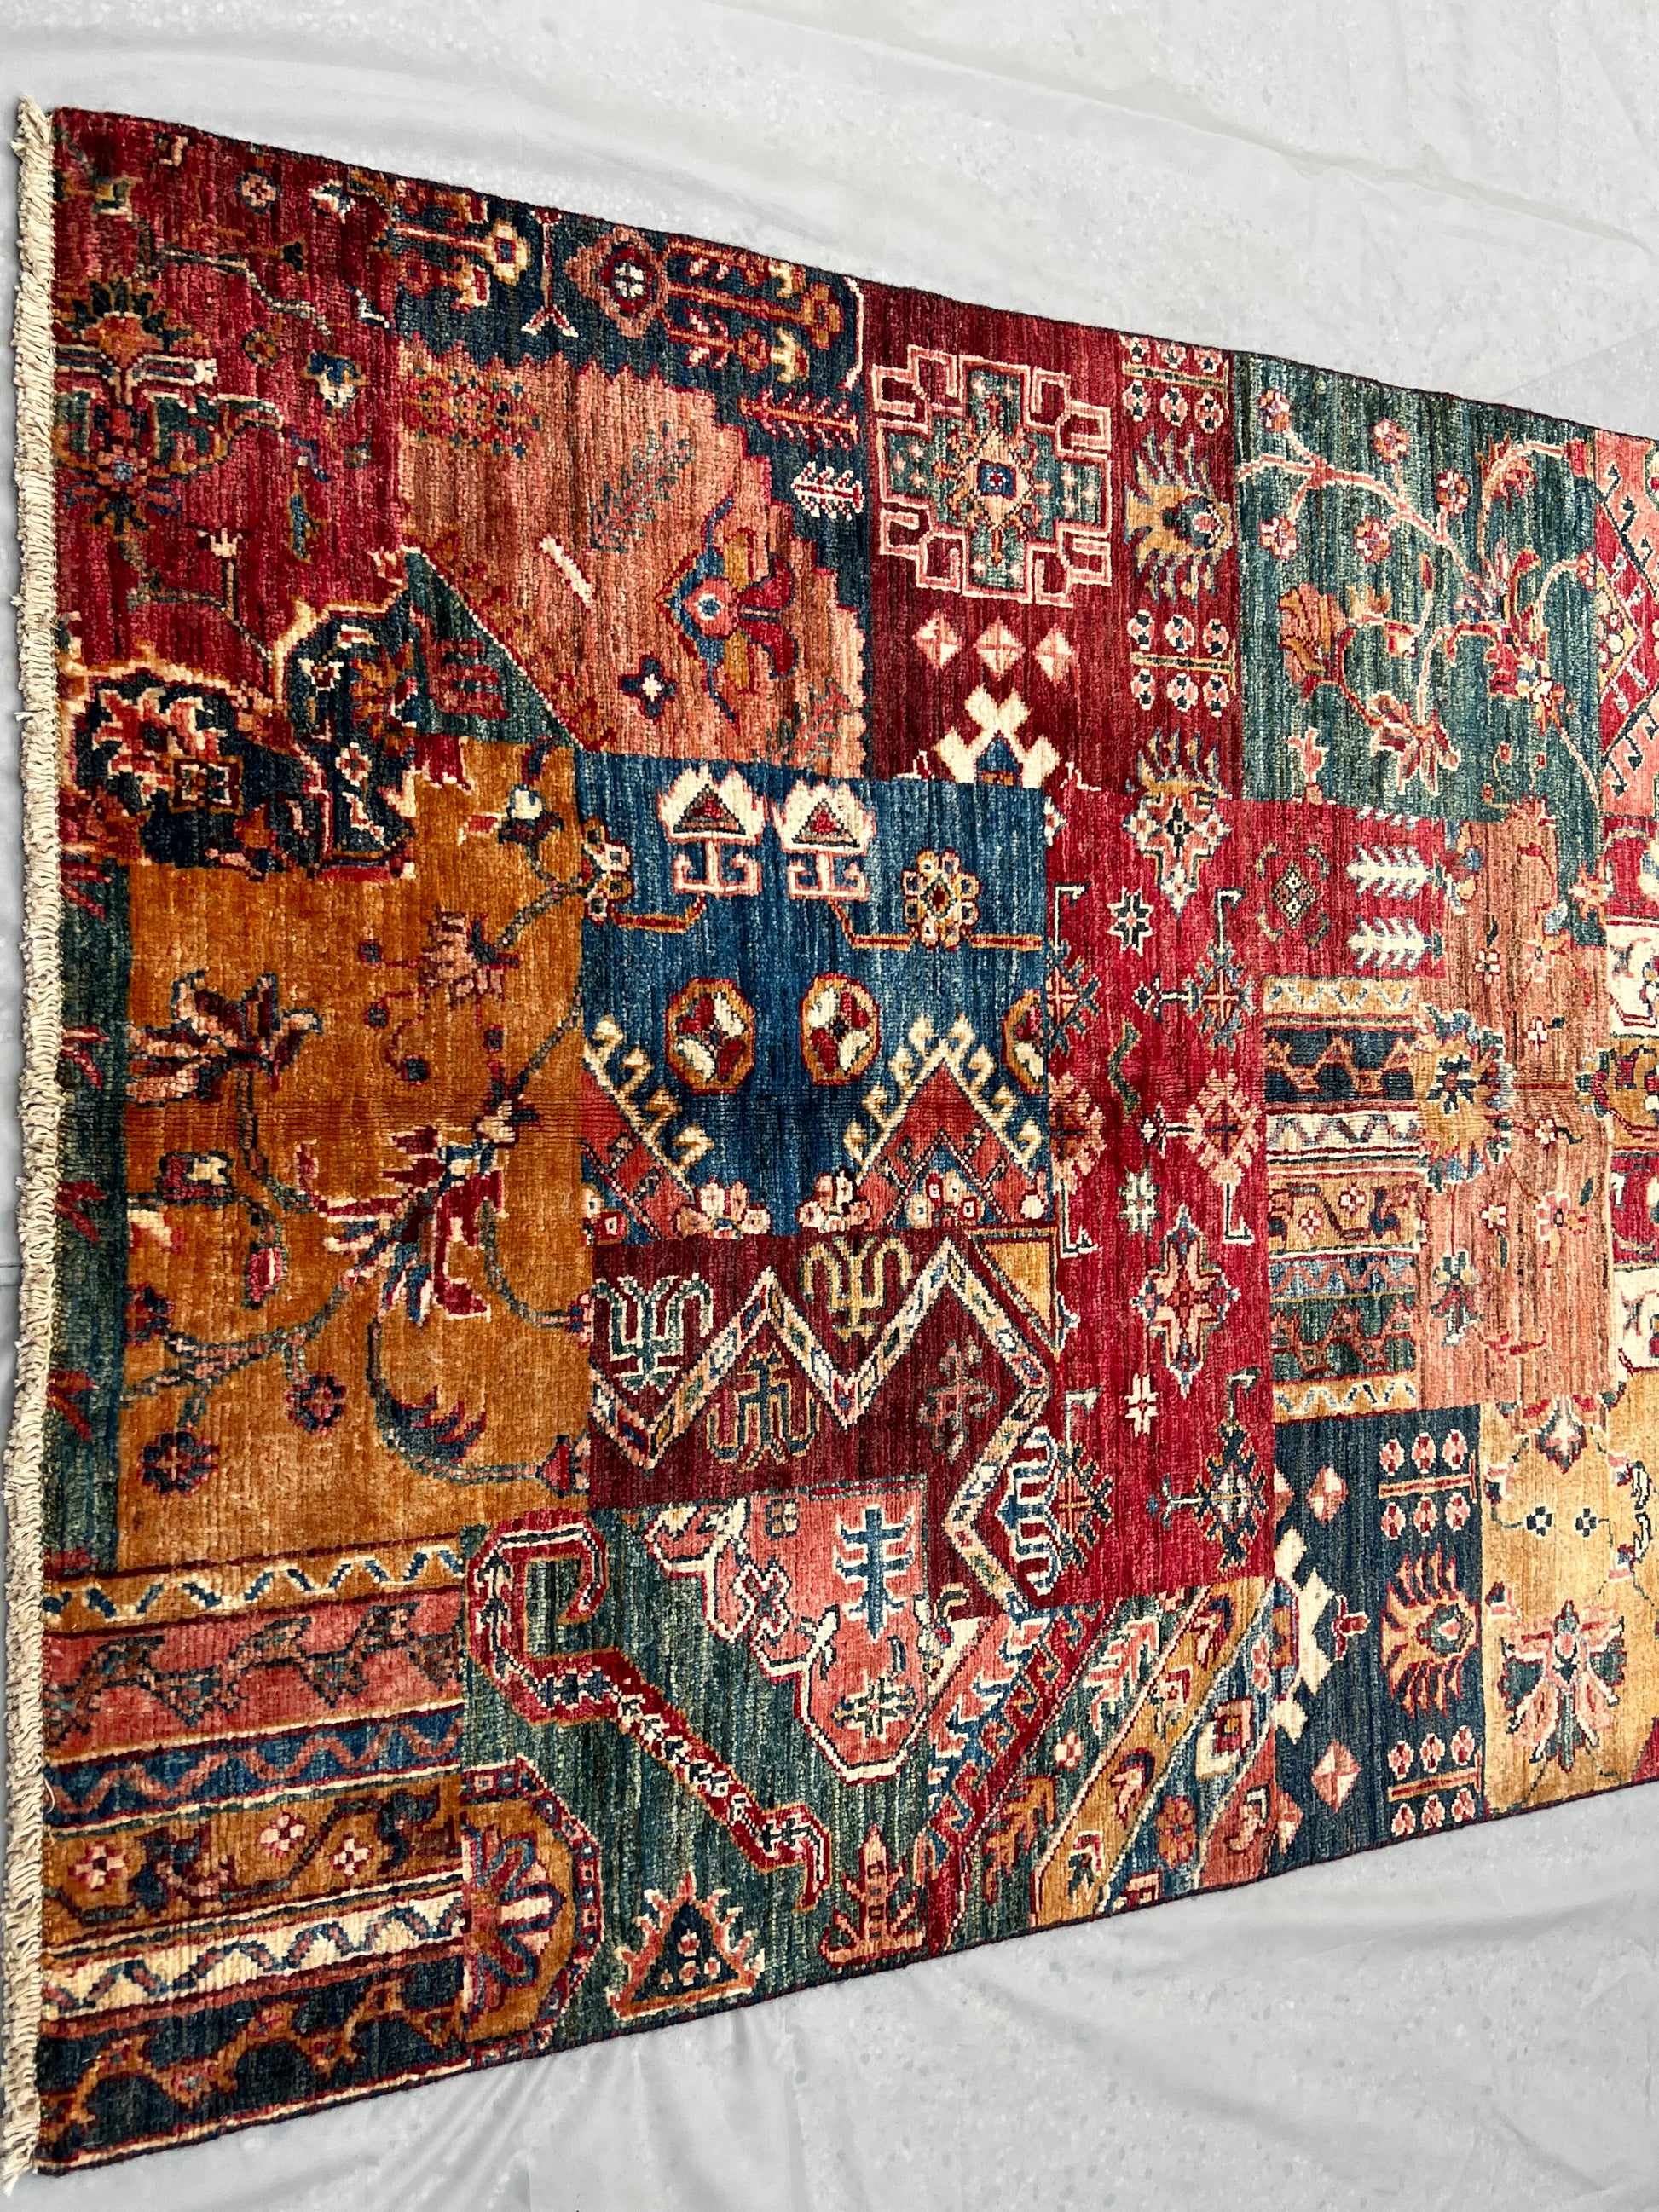 Afghan Hand Knotted/ Knitted Living Room/Dining Room Chob Rang(Shawl Design) Area Rug 4.7ftx3.3ft (CH-M-4.7X3.3-5-N) (Kabul) - Kabul Rugs